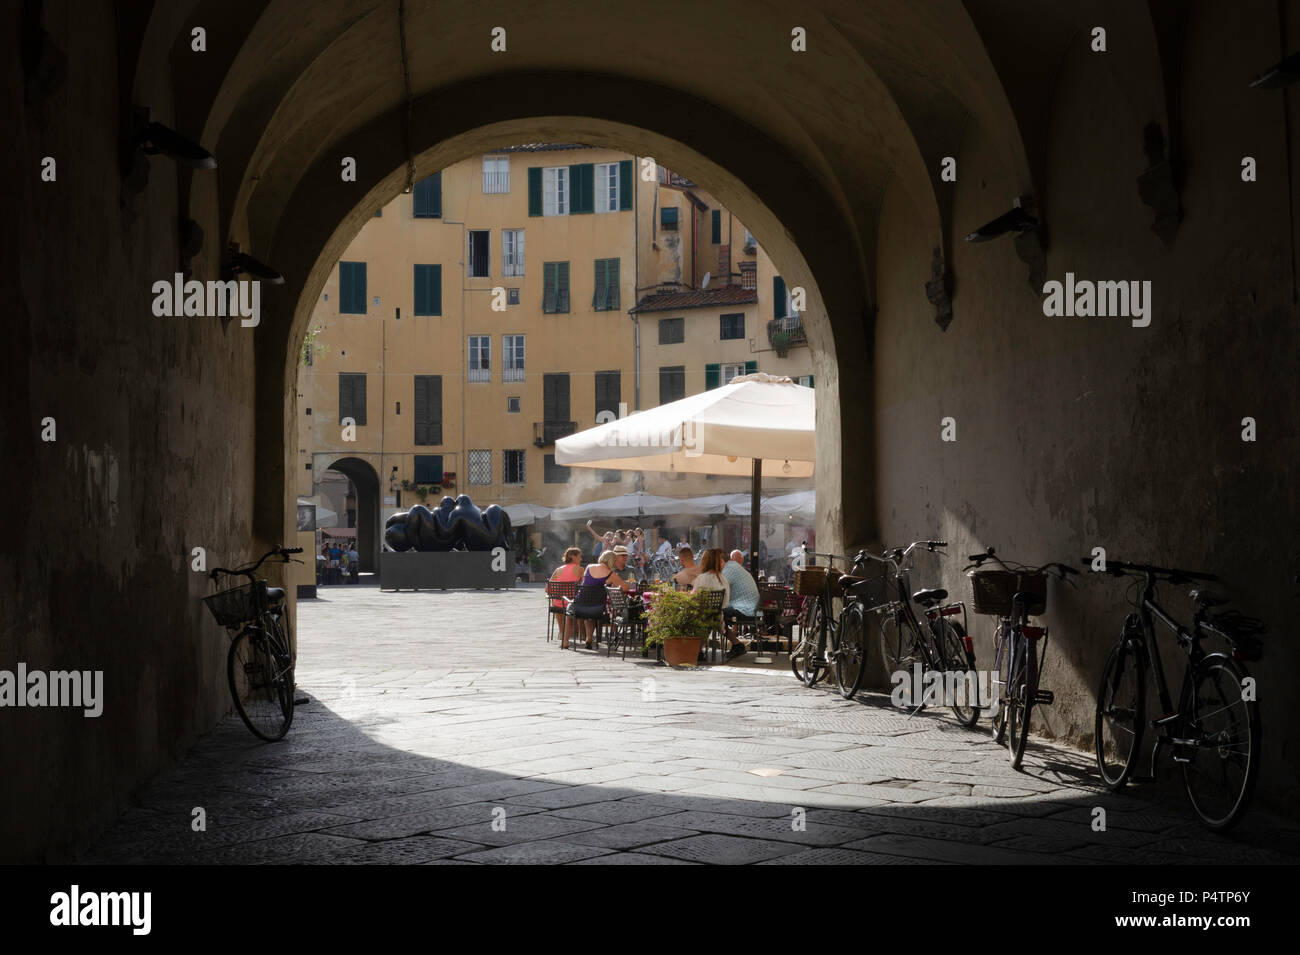 A view through one of the entrances into the Antifeatro in Lucca, this view shows diners on the square, and tourists in the background taking a selfie. Stock Photo